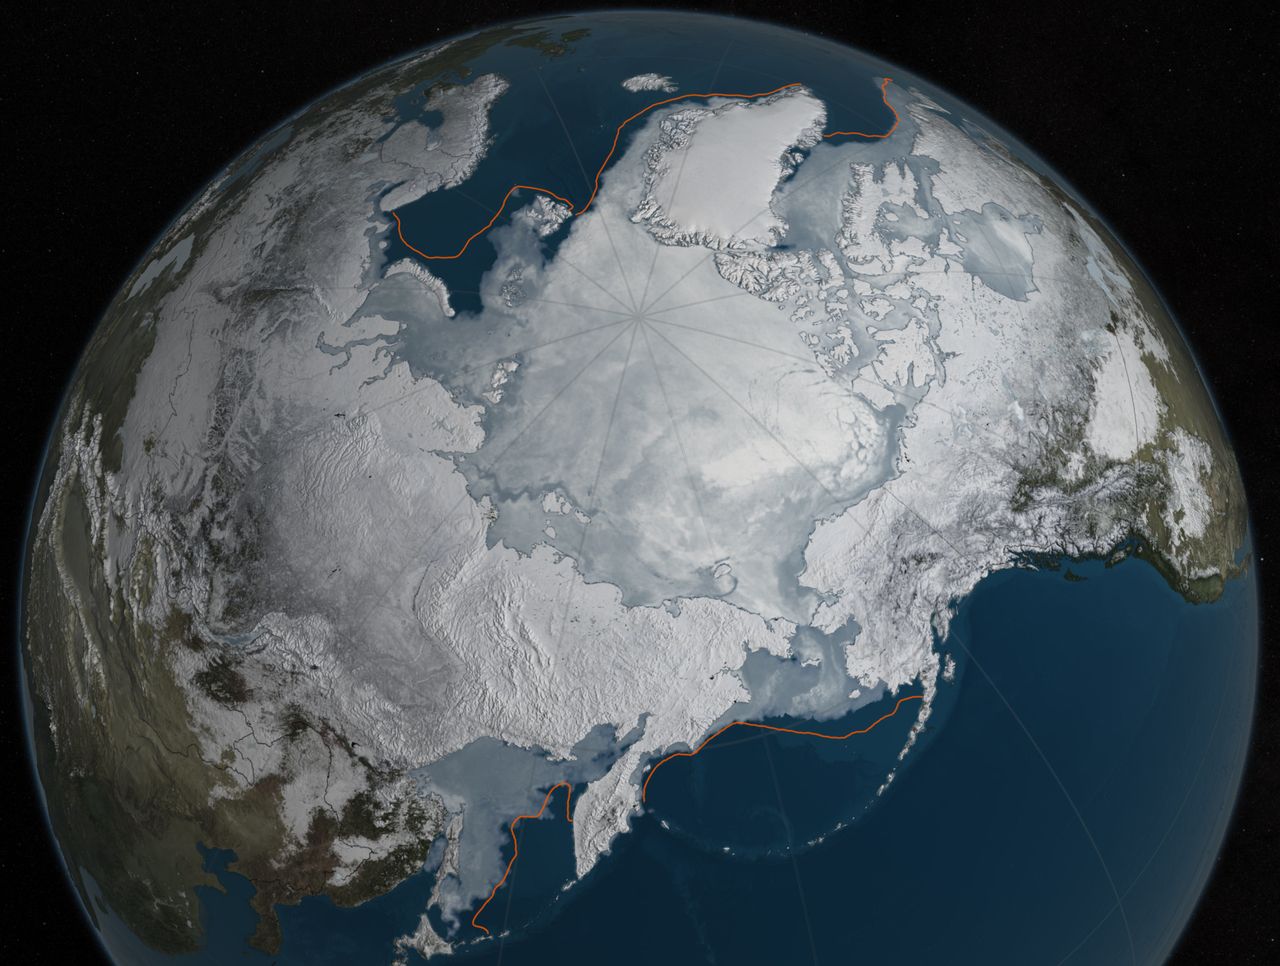 Arctic sea ice was at a record low wintertime maximum extent for the second straight year. At 5,607 million square miles, it is the lowest maximum extent in the satellite record, and 431,000 square miles below the 1981 to 2010 average maximum extent.